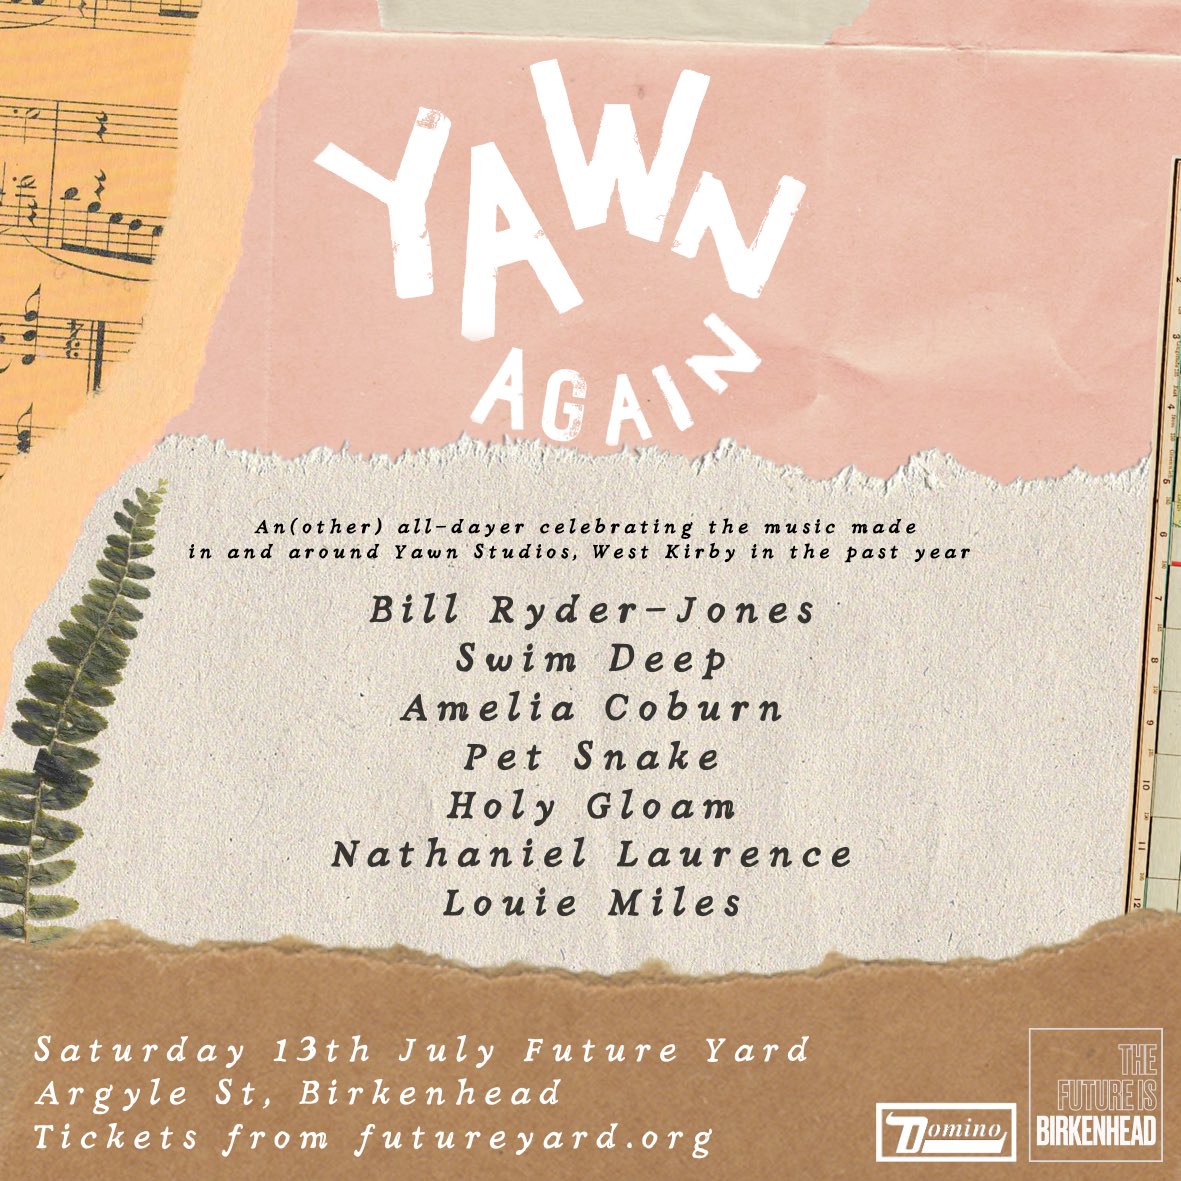 Very excited to be joining @BRyderJones, @SWIM_DEEP & more at this July’s YawnFest lineup at @future_yard. Tickets go on sale from 10am Friday. Can’t wait to be back having a pint in The Wirral. futureyard.org/listings/yawn-…